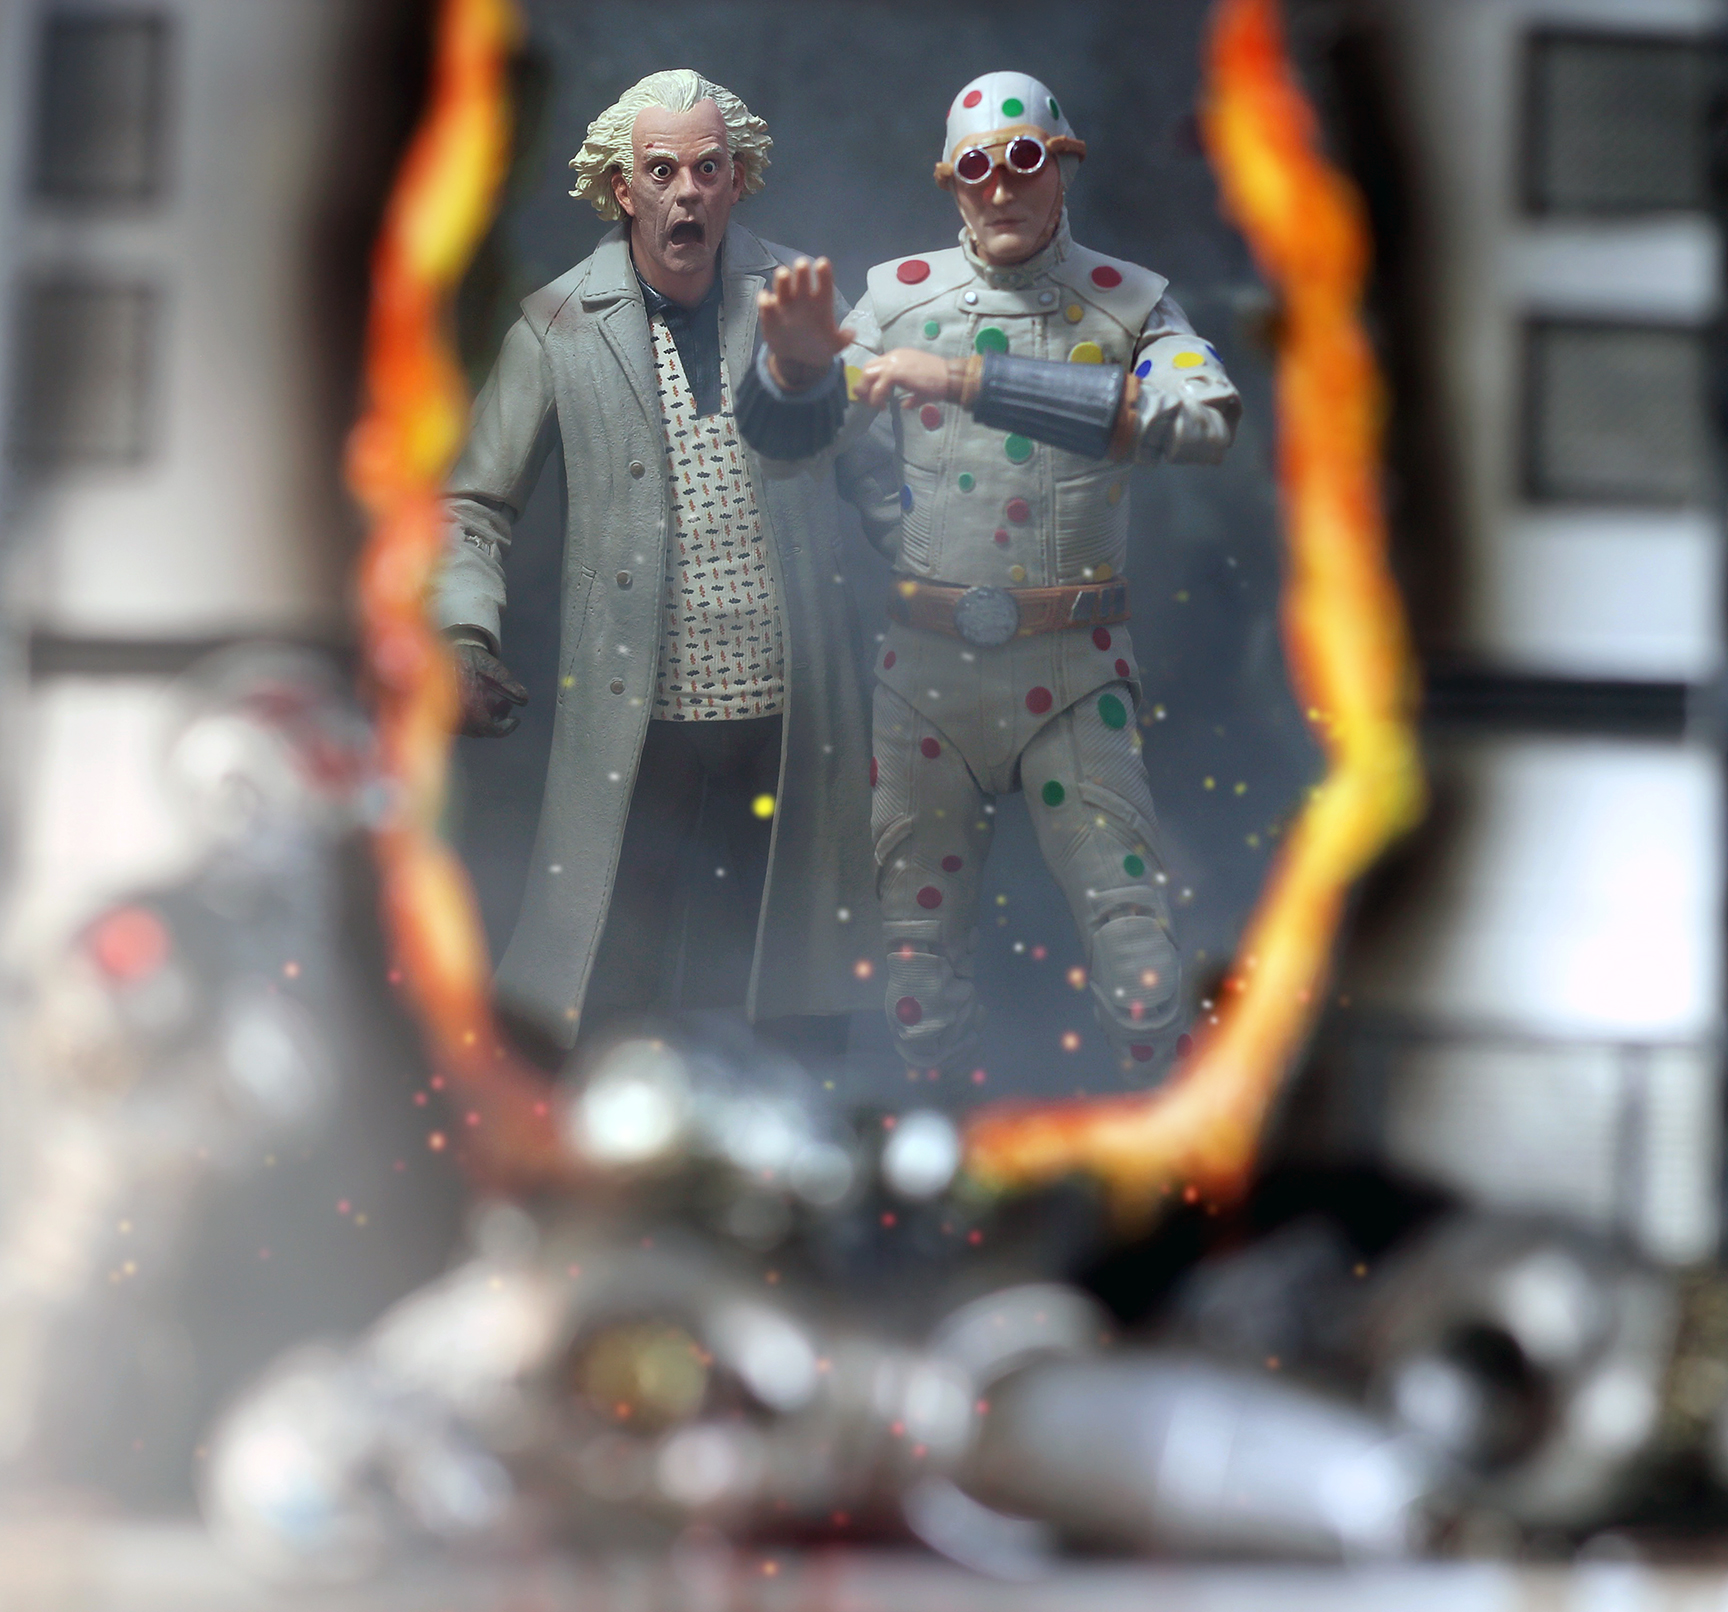 Polka Dot Man and Doc Brown by Oliver Peterson